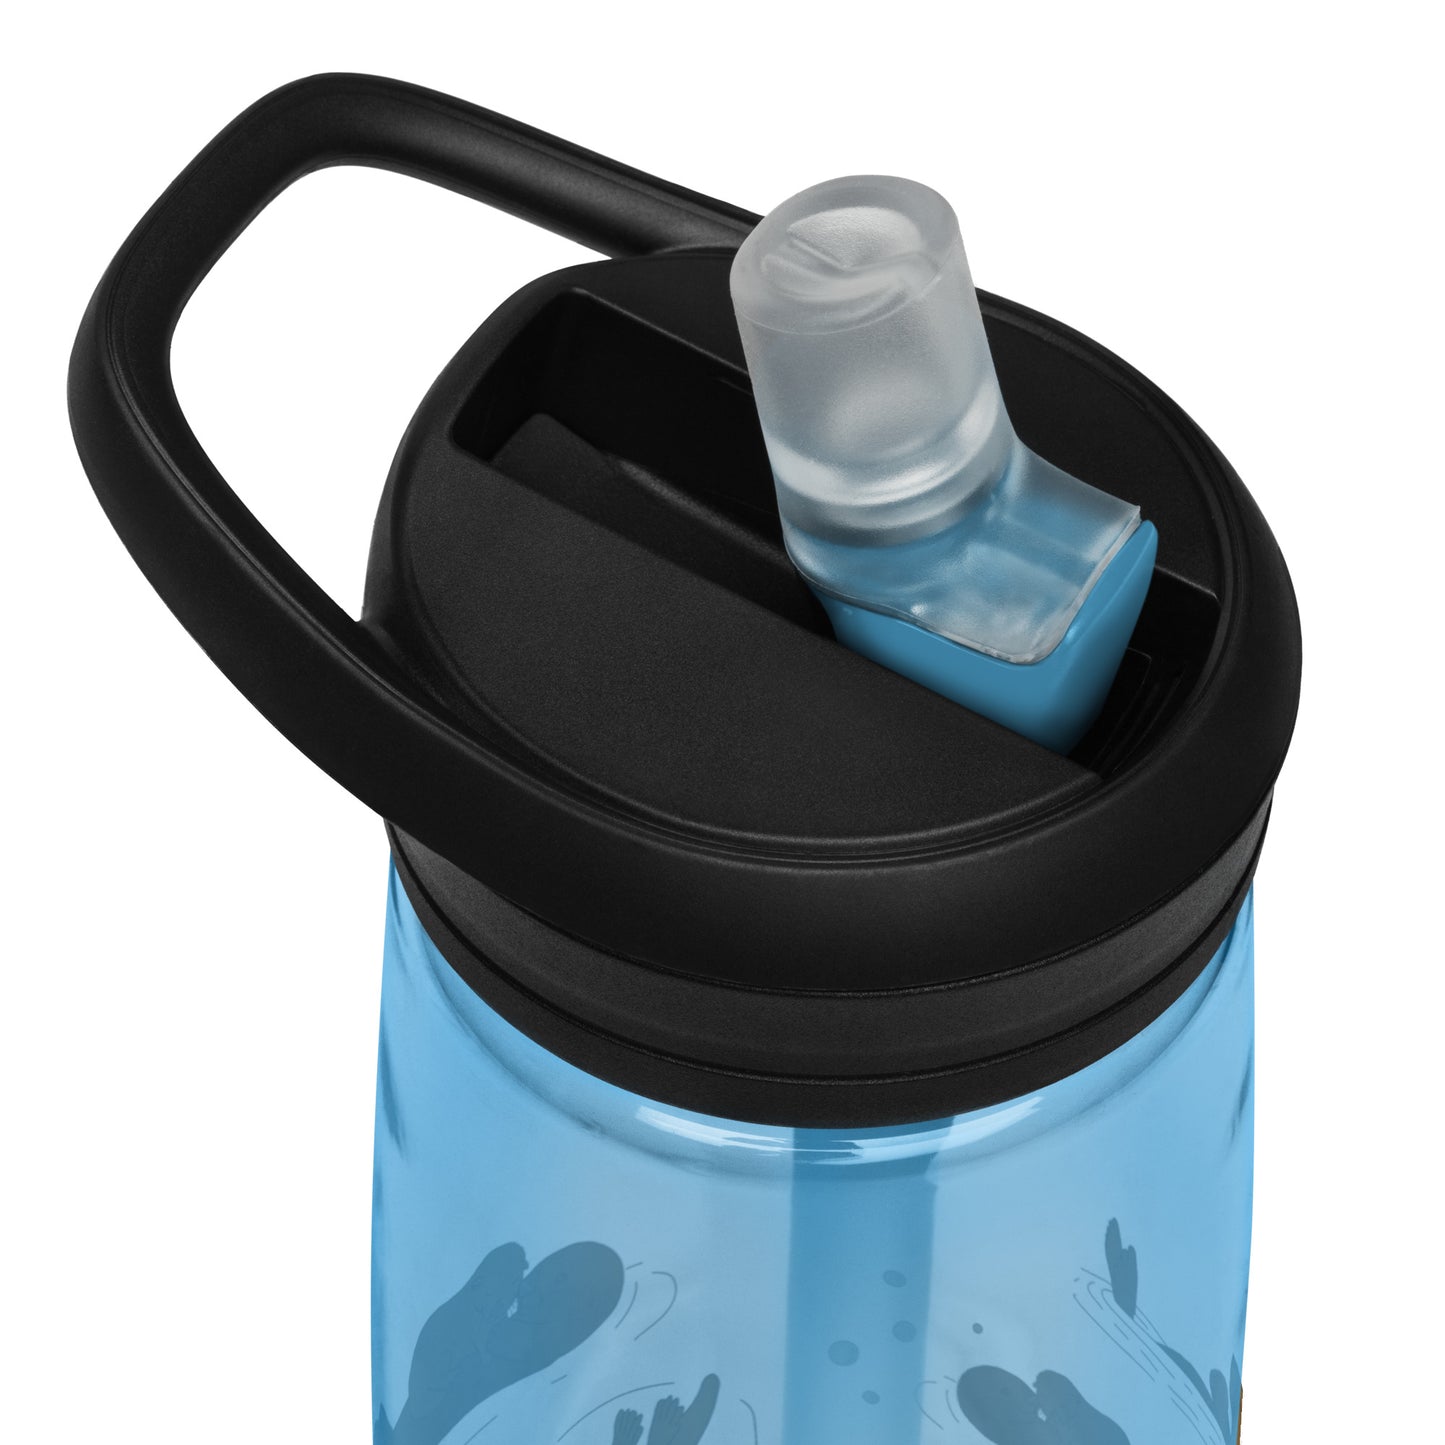 25 ounce sports water bottle with spill proof lid and bite valve. Light blue stain and odor-resistant BPA-free plastic with sea otter designs around the bottle, swimming above the seaweed and shells. Detail view of lid and bite valve.